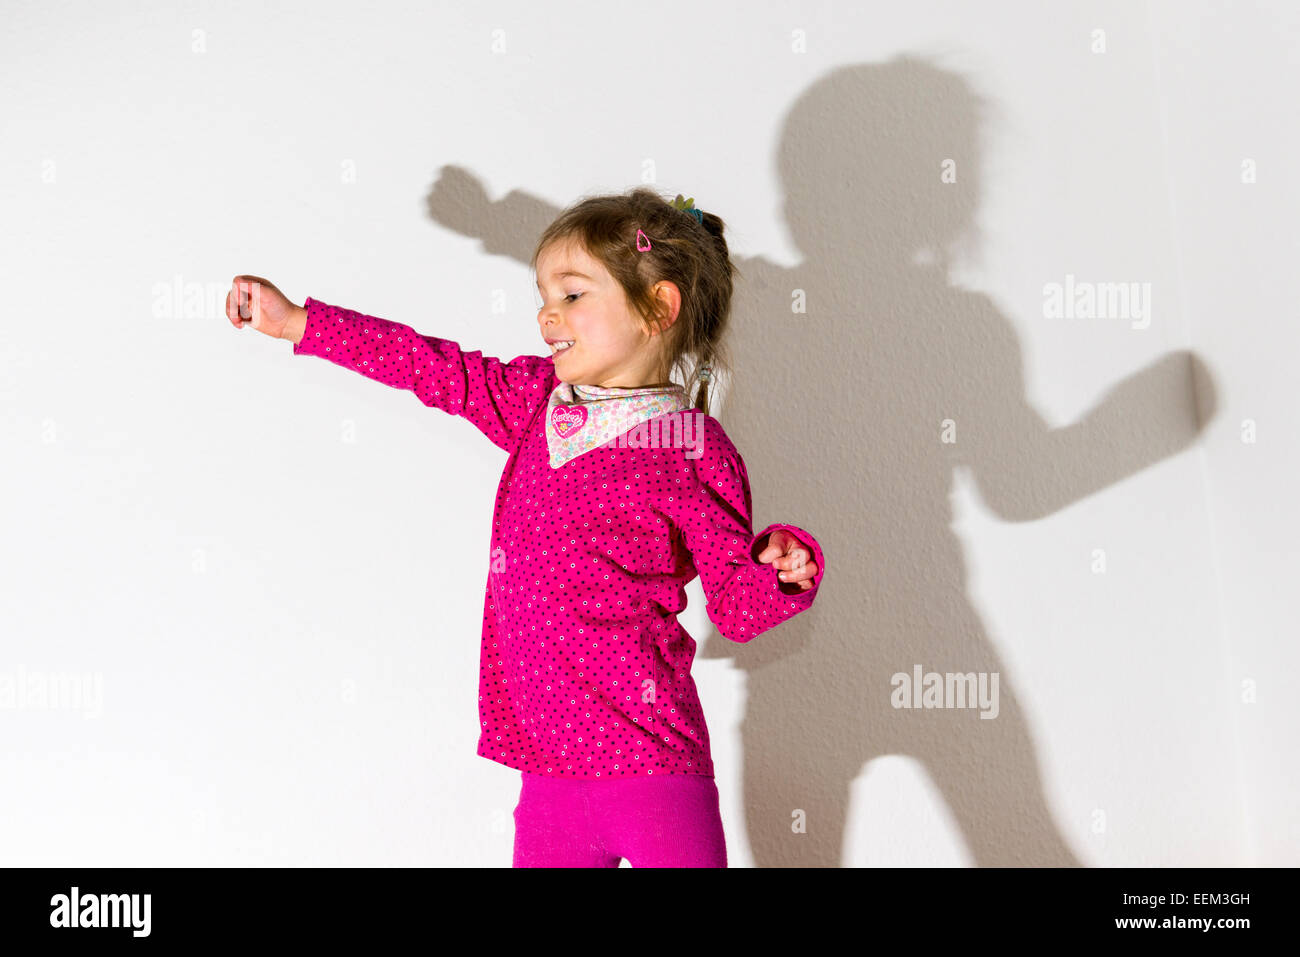 Girl, 3 years, wearing a pink shirt, dancing, casting a shadow on a white wall Stock Photo